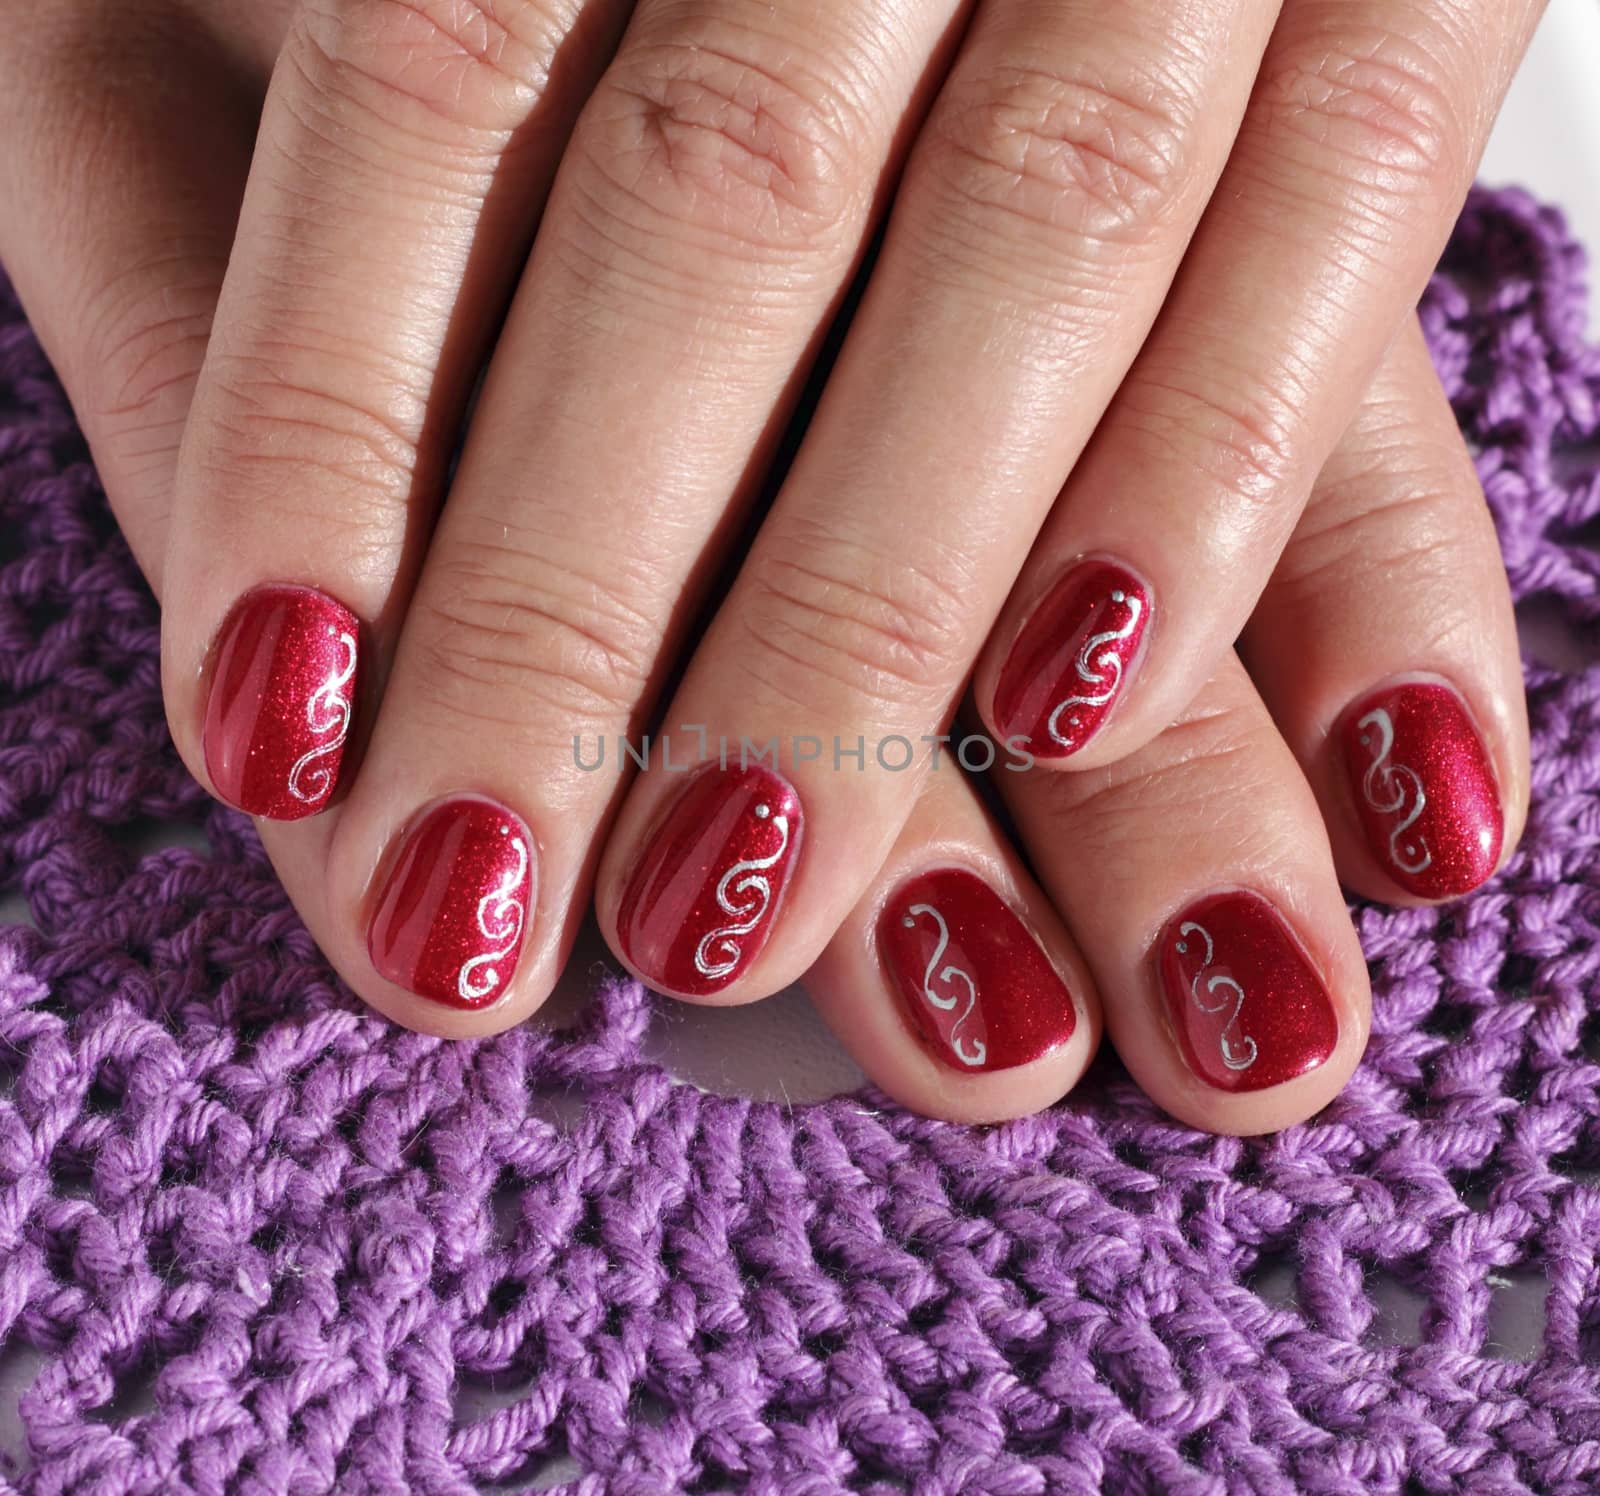 Woman fingers with decorated nails